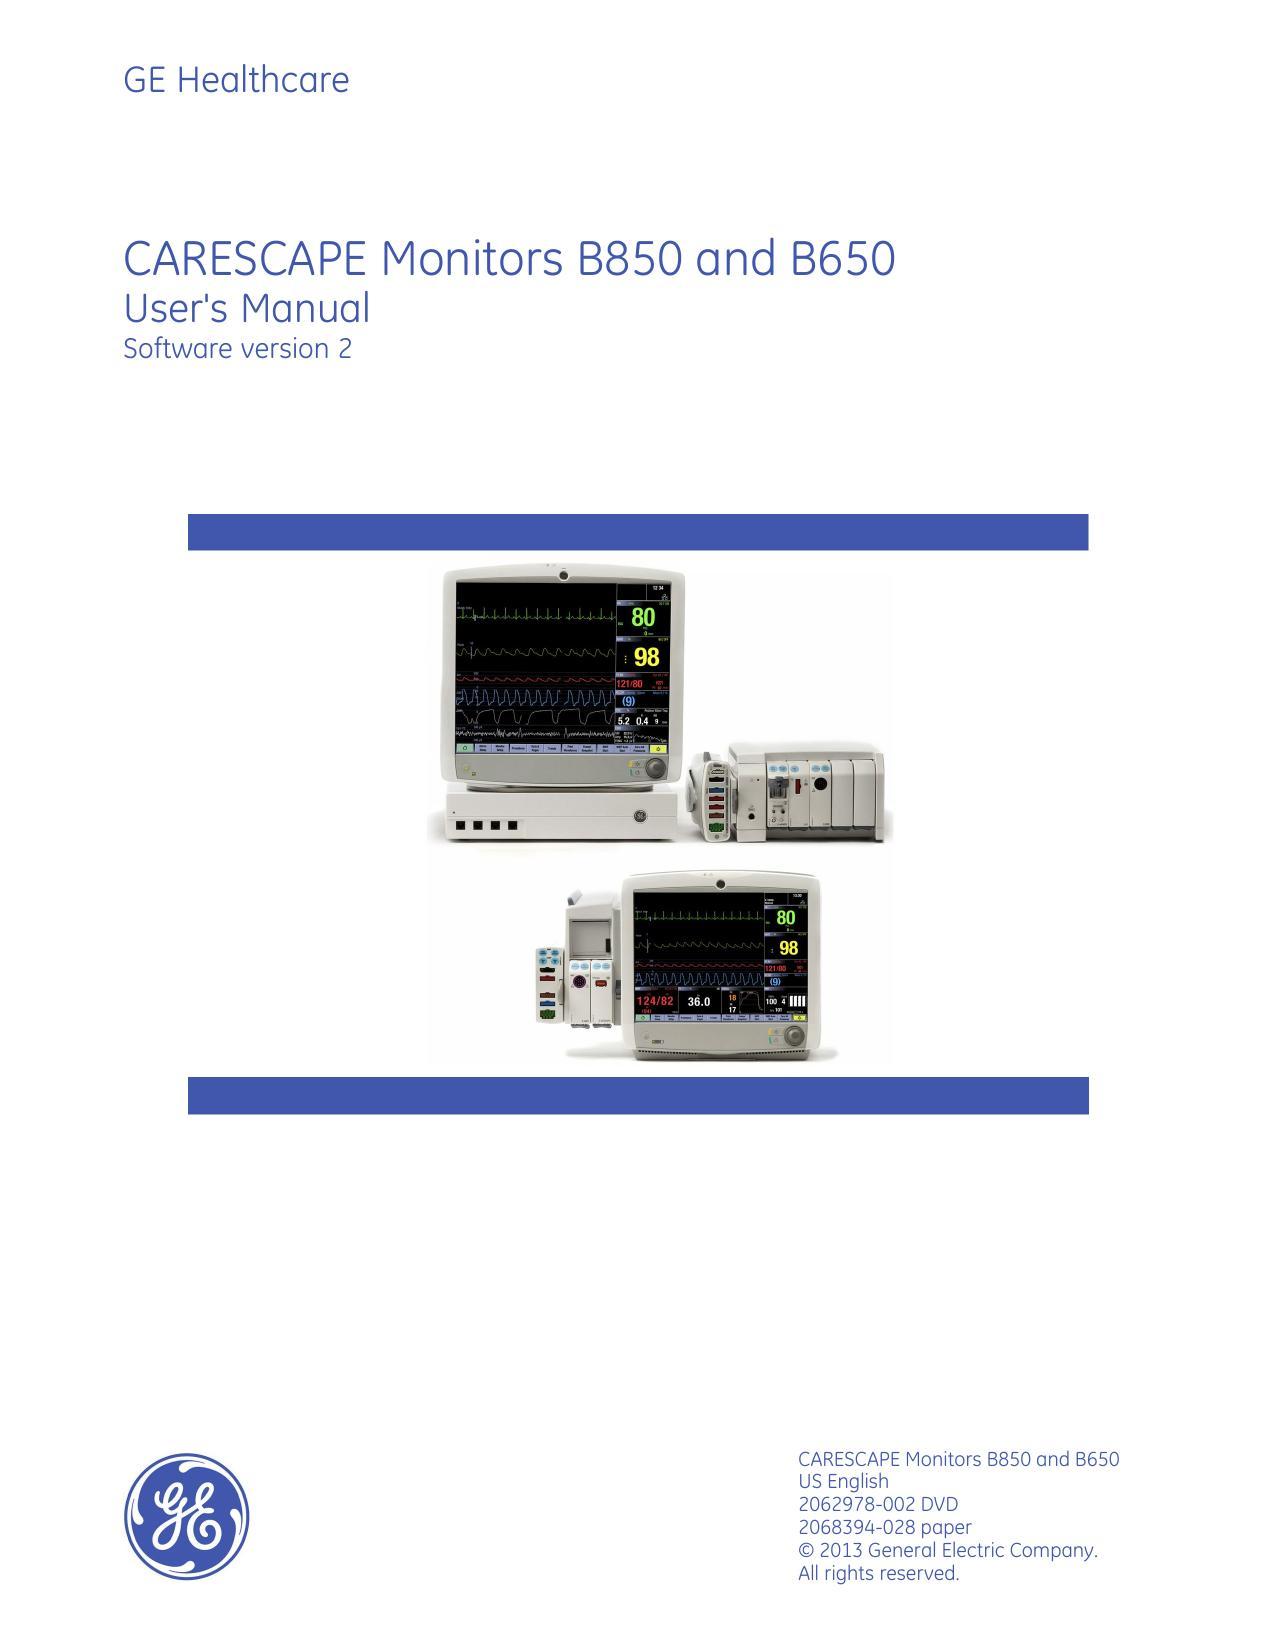 carescape-monitors-b850-and-b650-users-manual-software-version-2.pdf